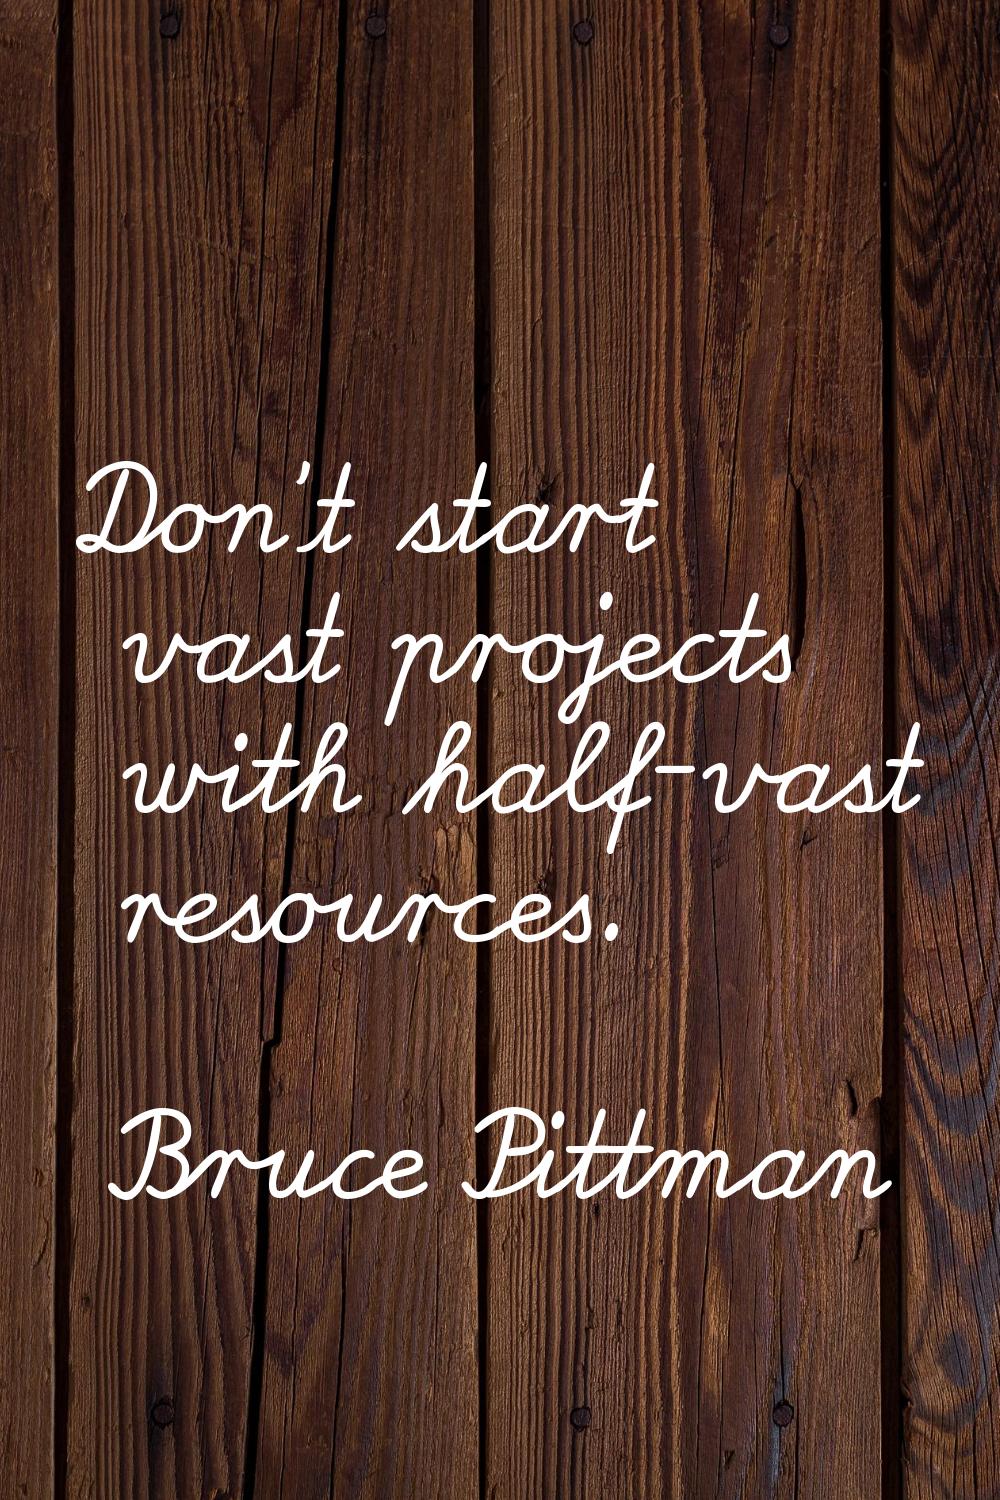 Don't start vast projects with half-vast resources.